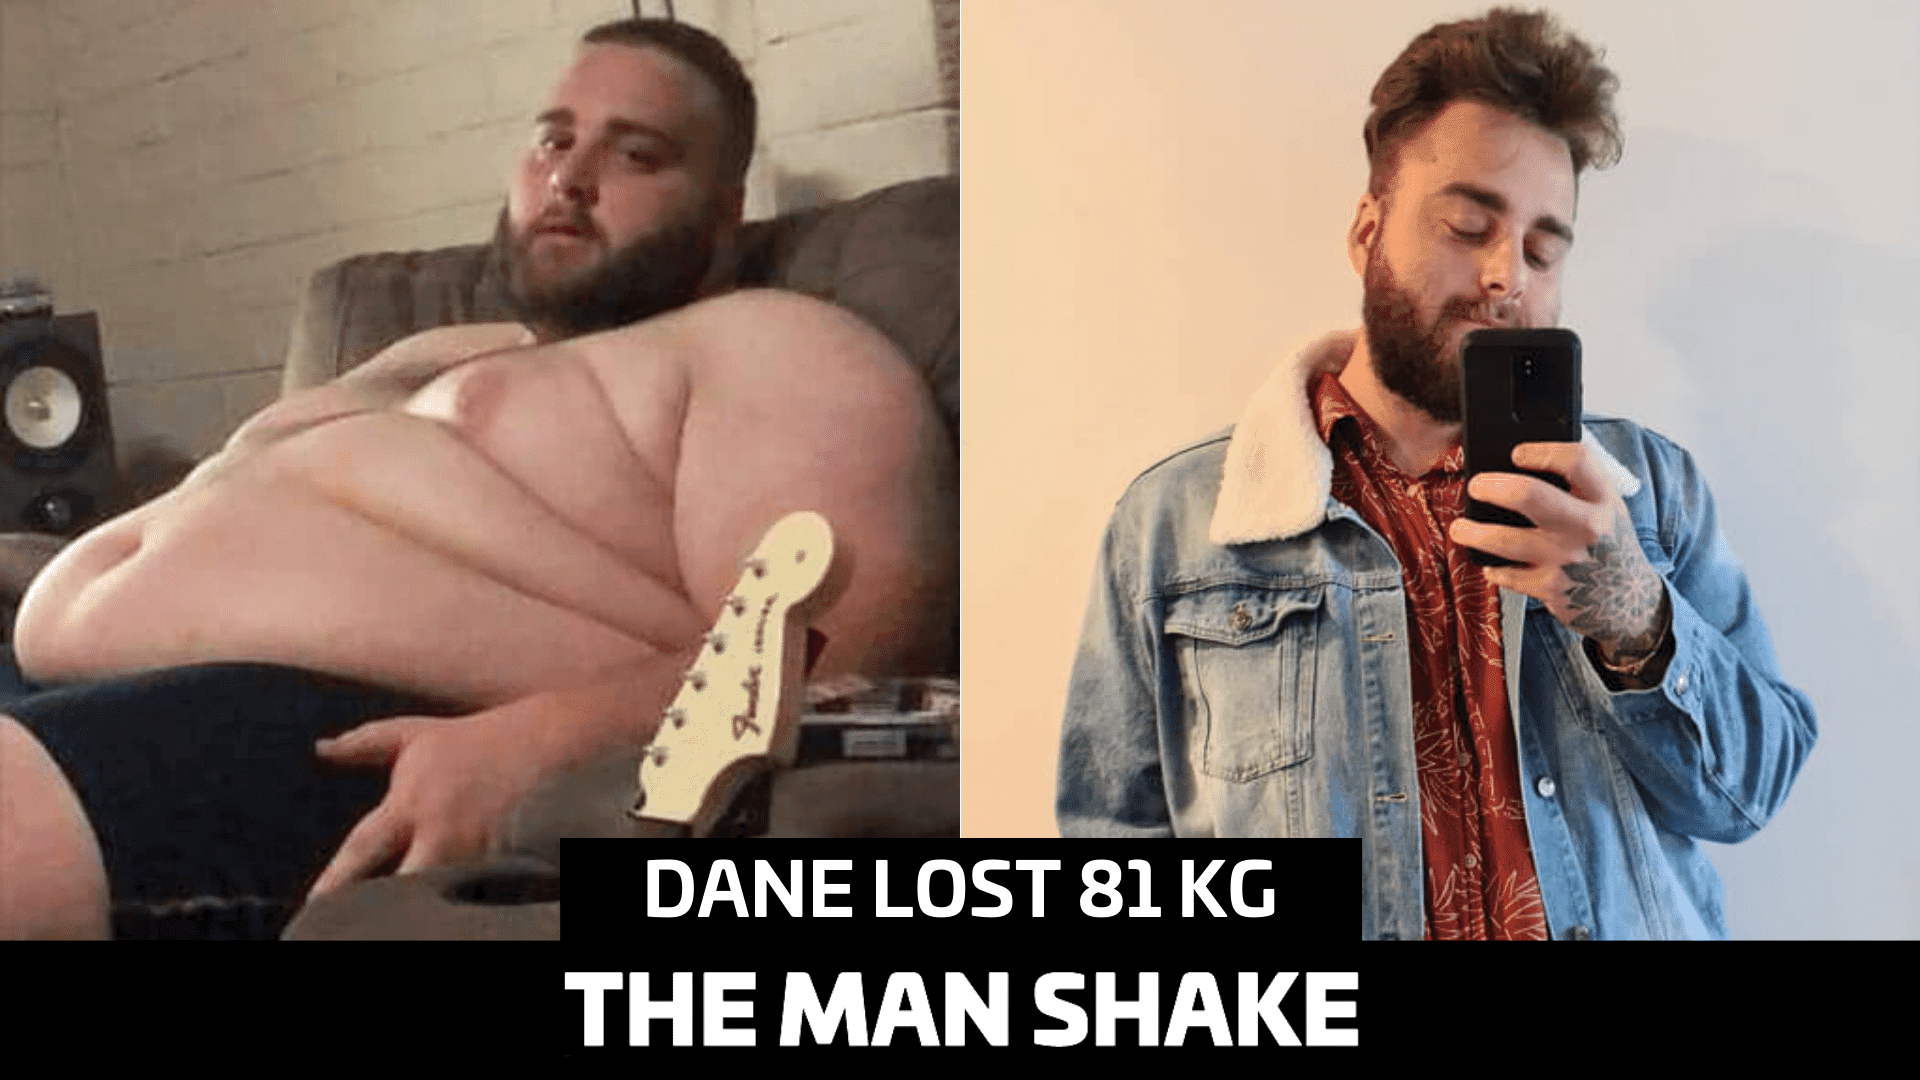 Dane lost a jaw dropping 81kg!